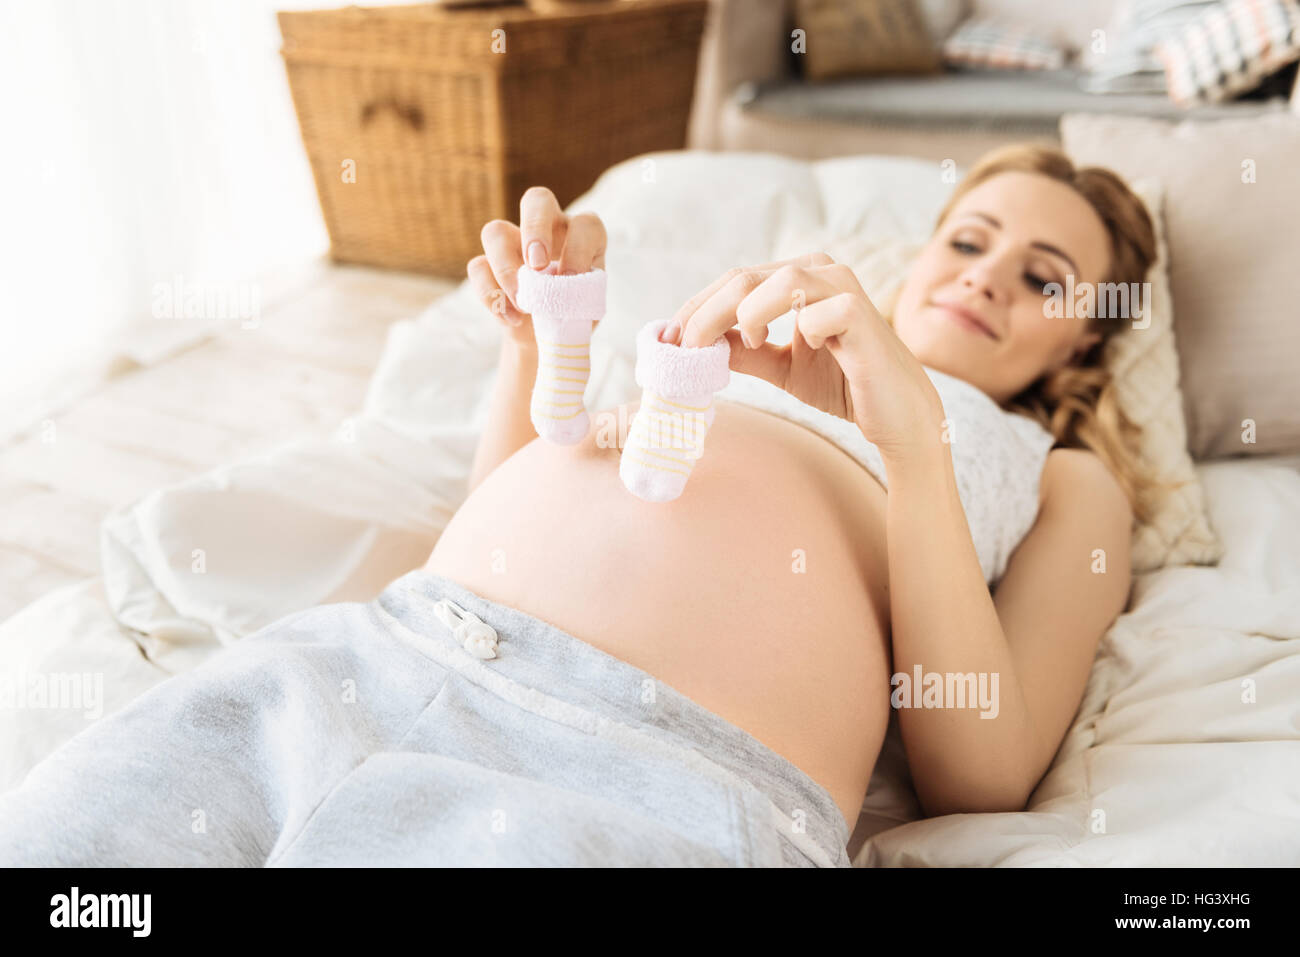 Pregnant woman holding baby socks in bed Stock Photo